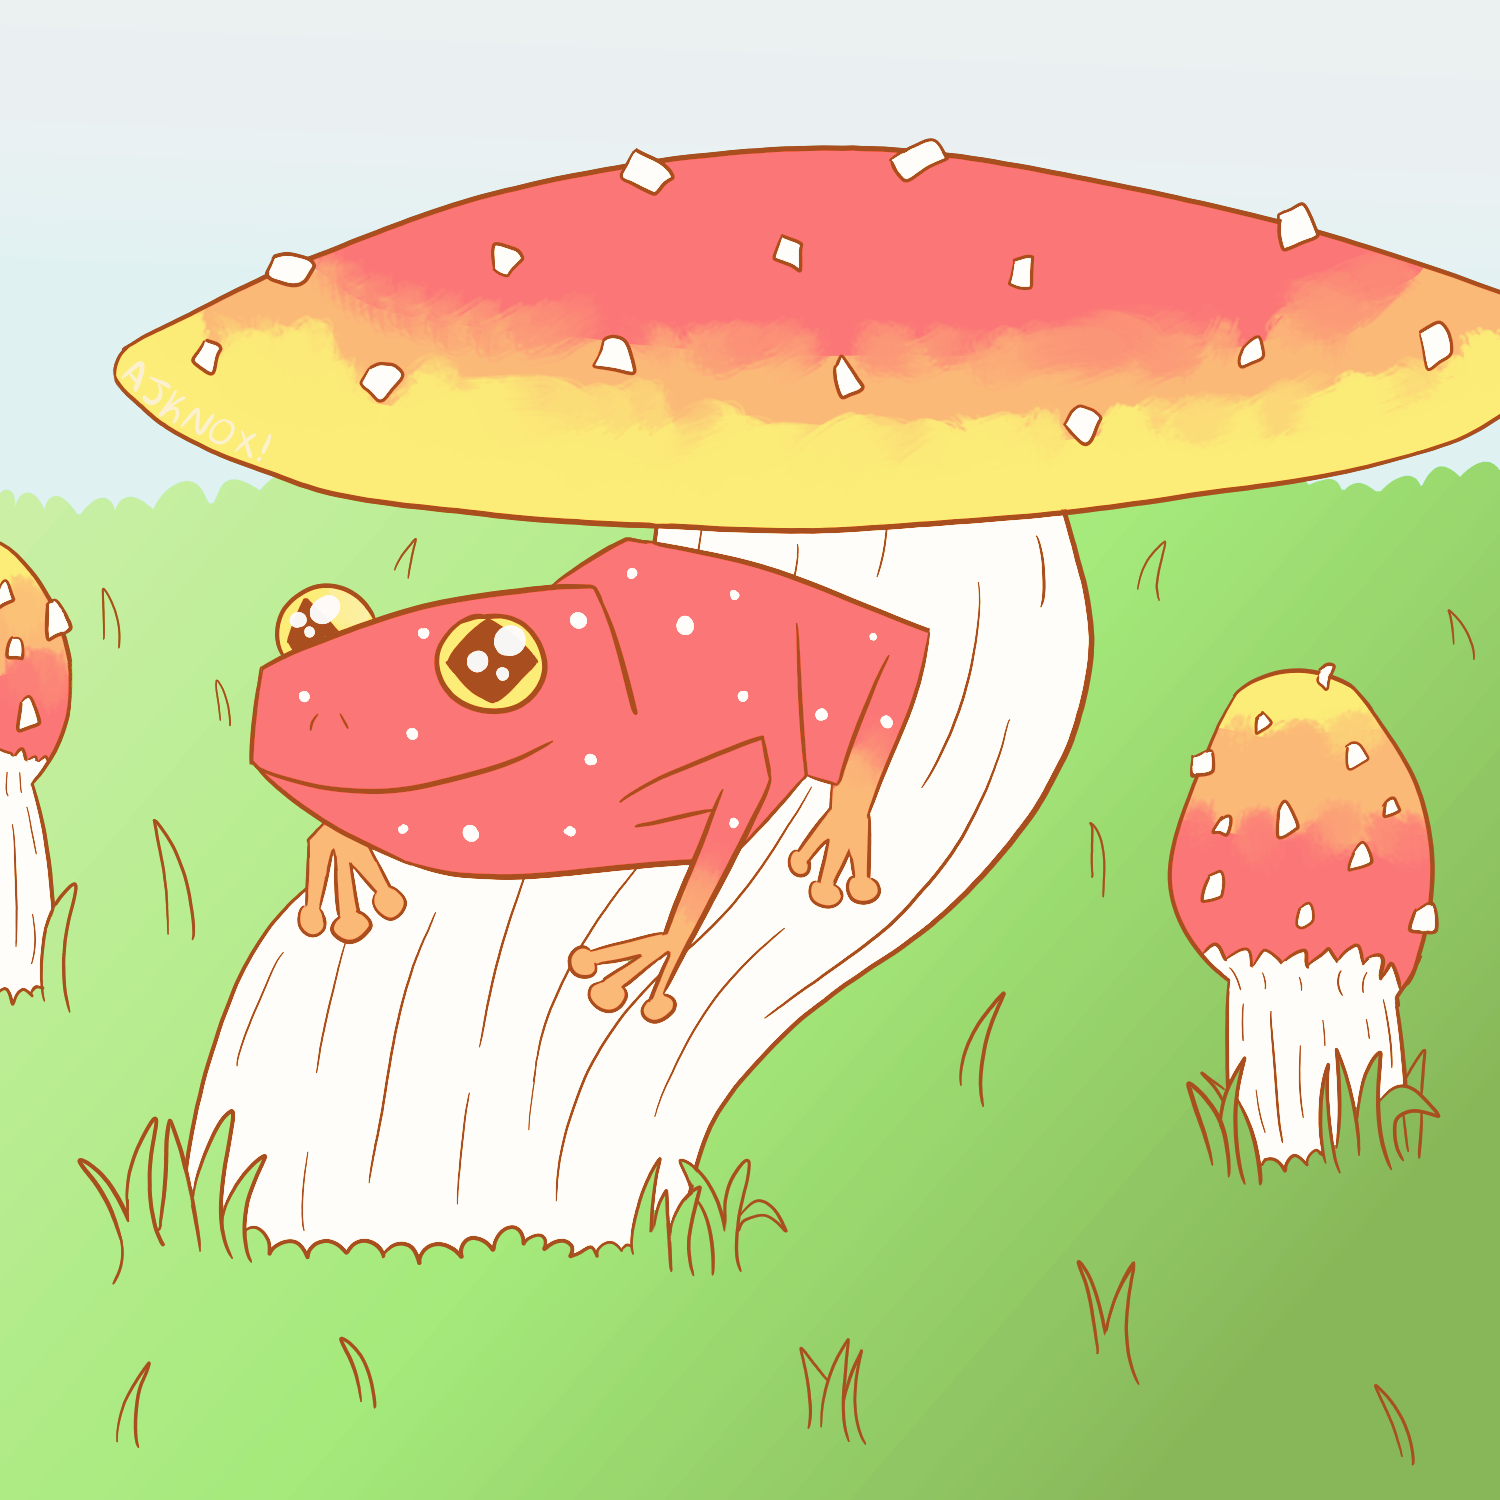 a red frog with orange feet sitting on the horizontal stem of a mushroom that shares its color scheme. it appears as if it's smiling. two other mushrooms are shown nearby.